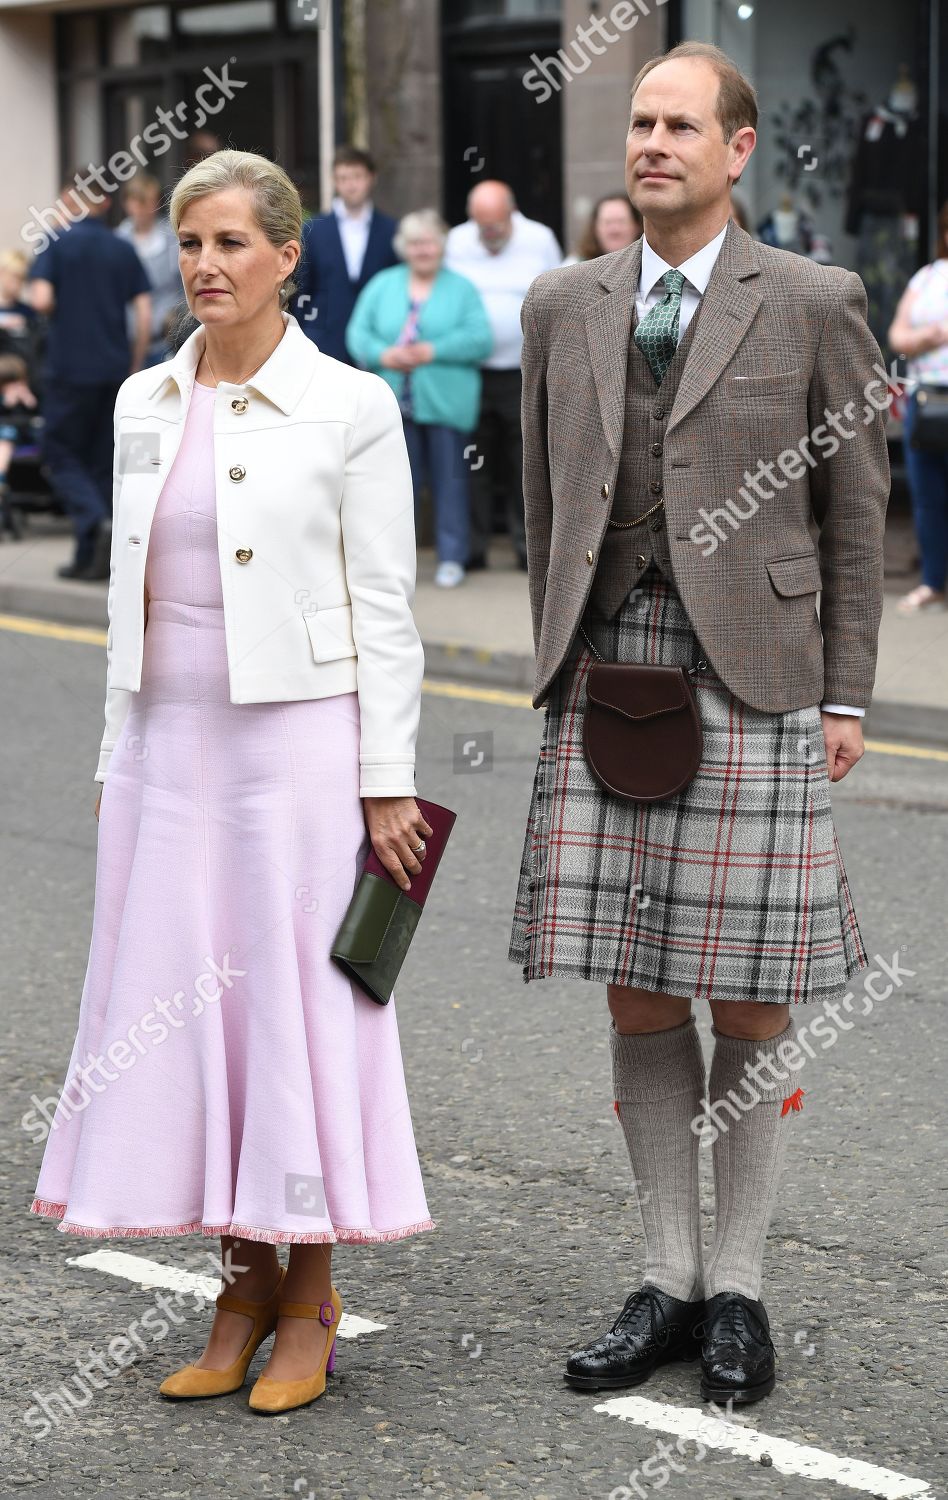 sophie-countess-of-wessex-and-prince-edward-visit-to-scotland-uk-shutterstock-editorial-10325445a.jpg